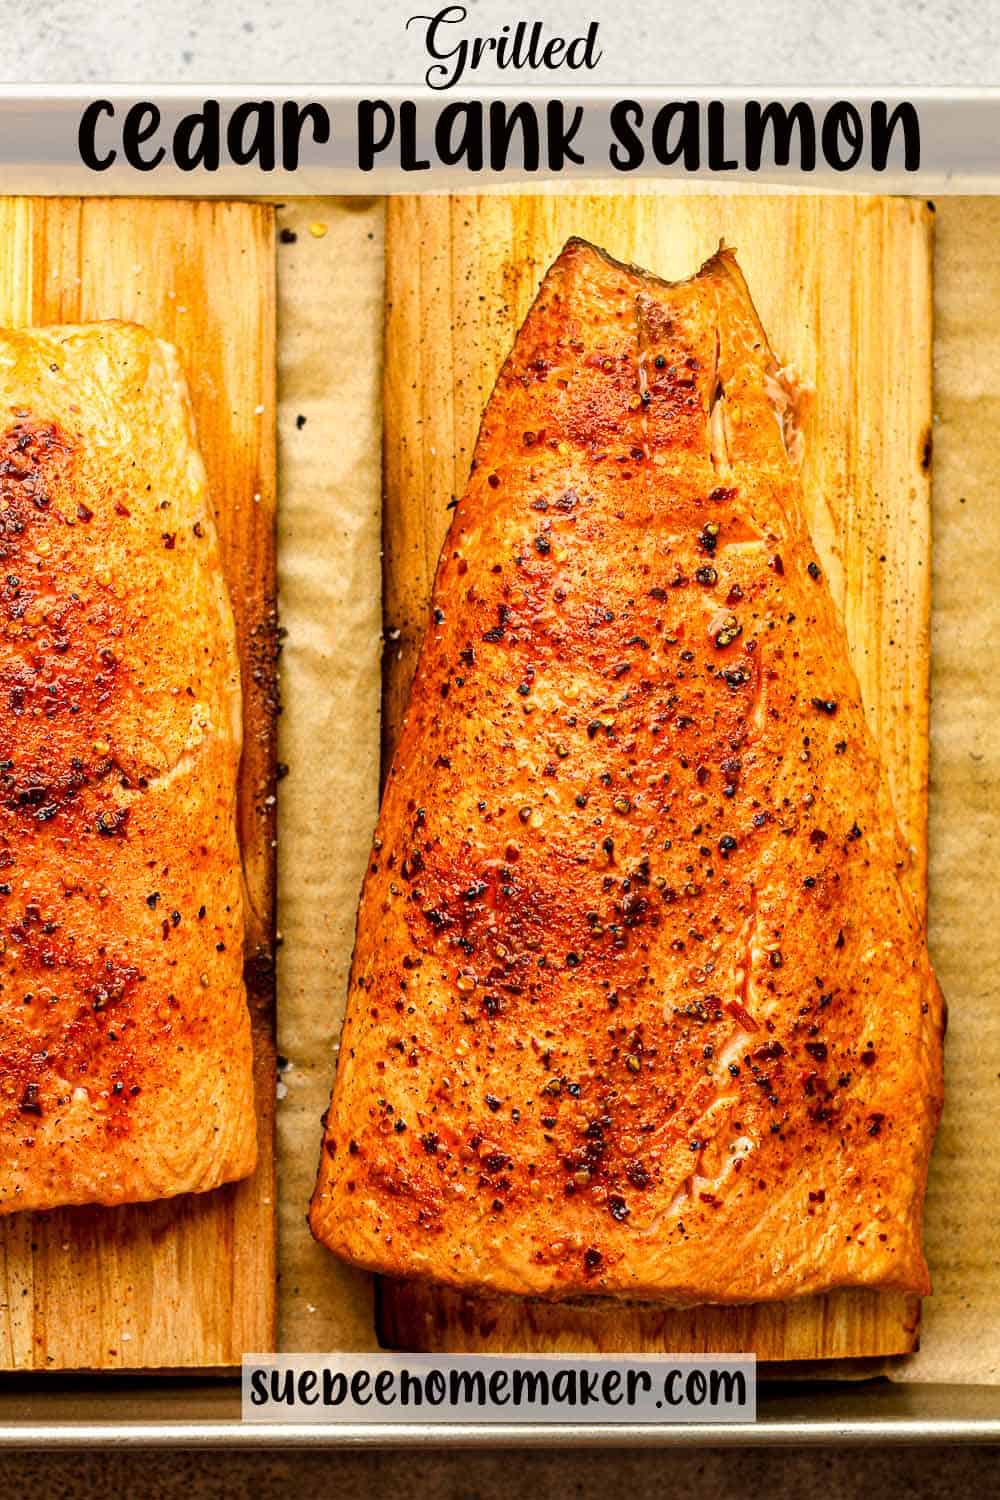 Two large pieces of grilled salmon on cedar planks